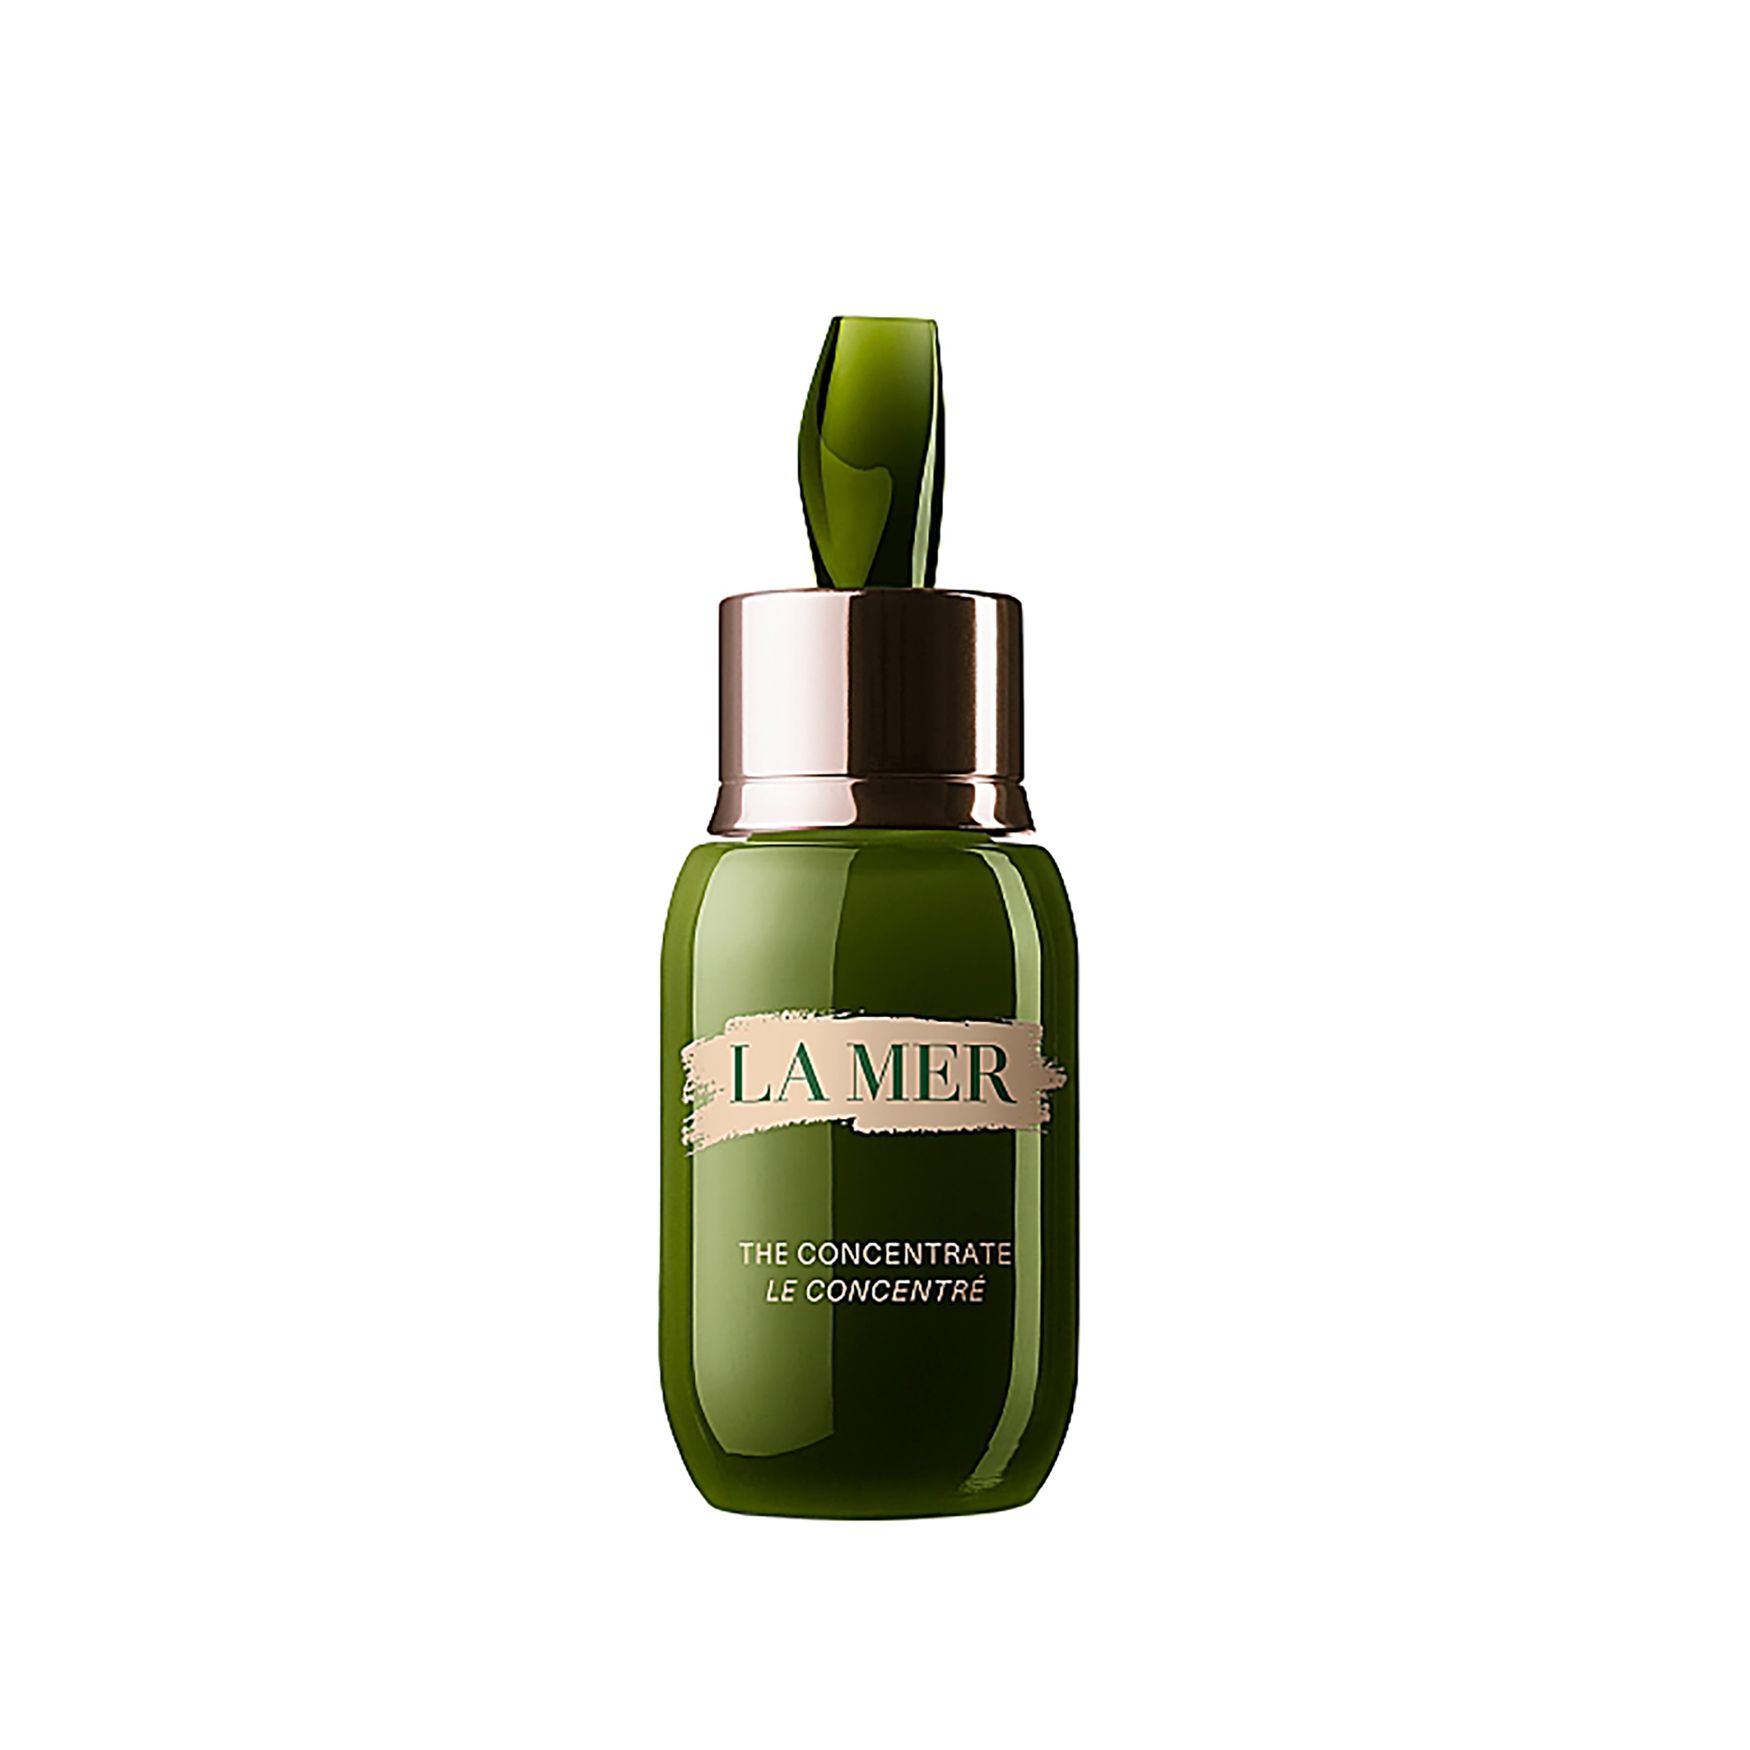 La Mer The Concentrate | Space NK | Space NK (EU)